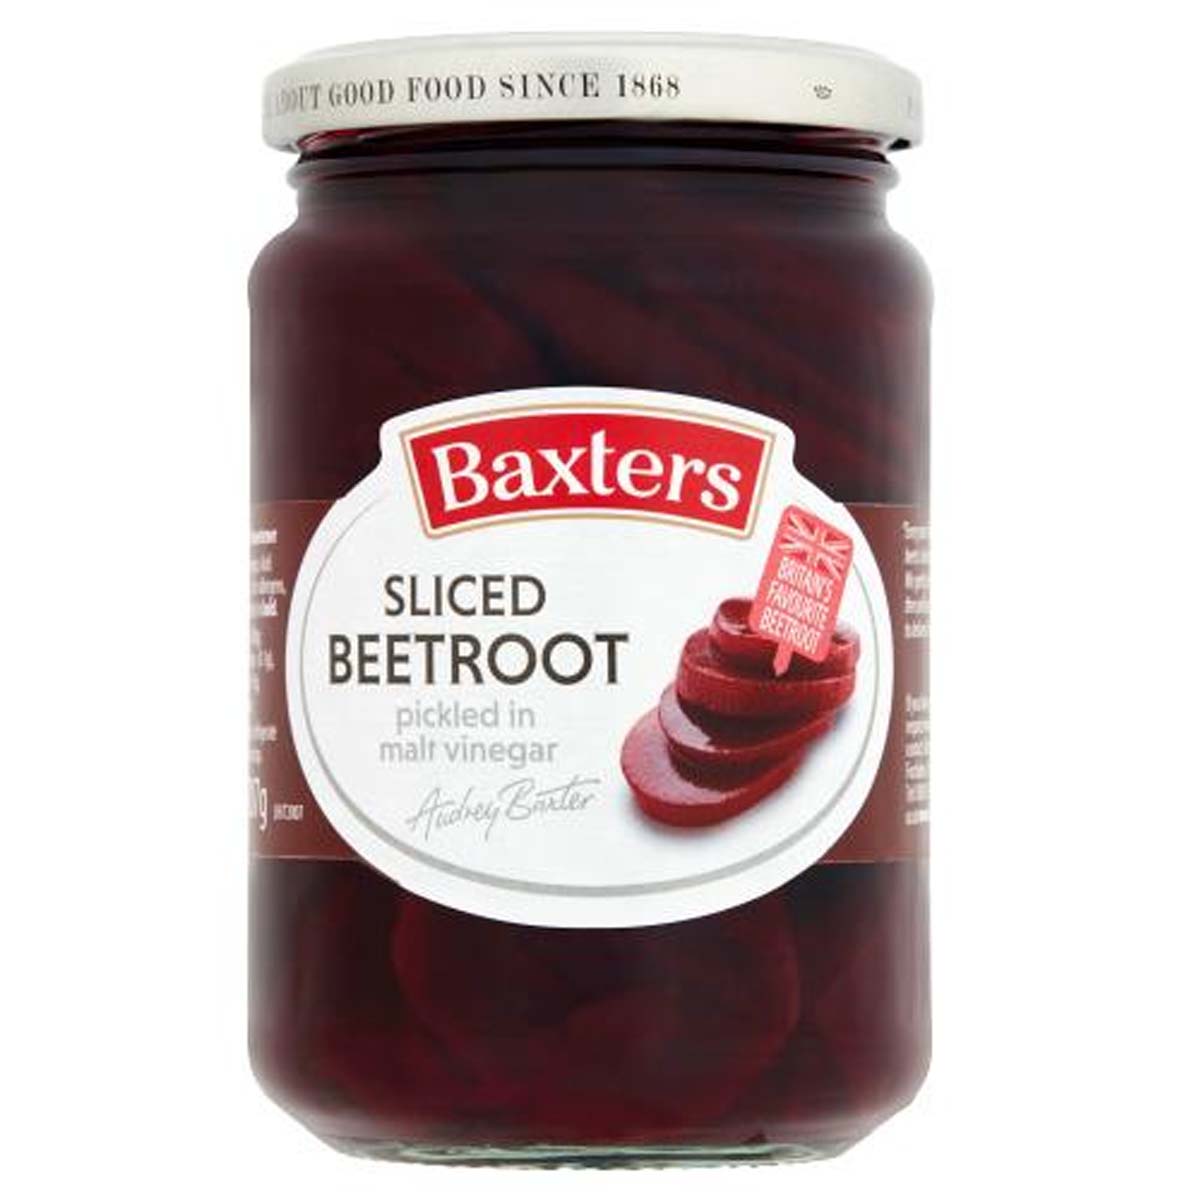 Baxters - Sliced Beetroot - 340g - Continental Food Store